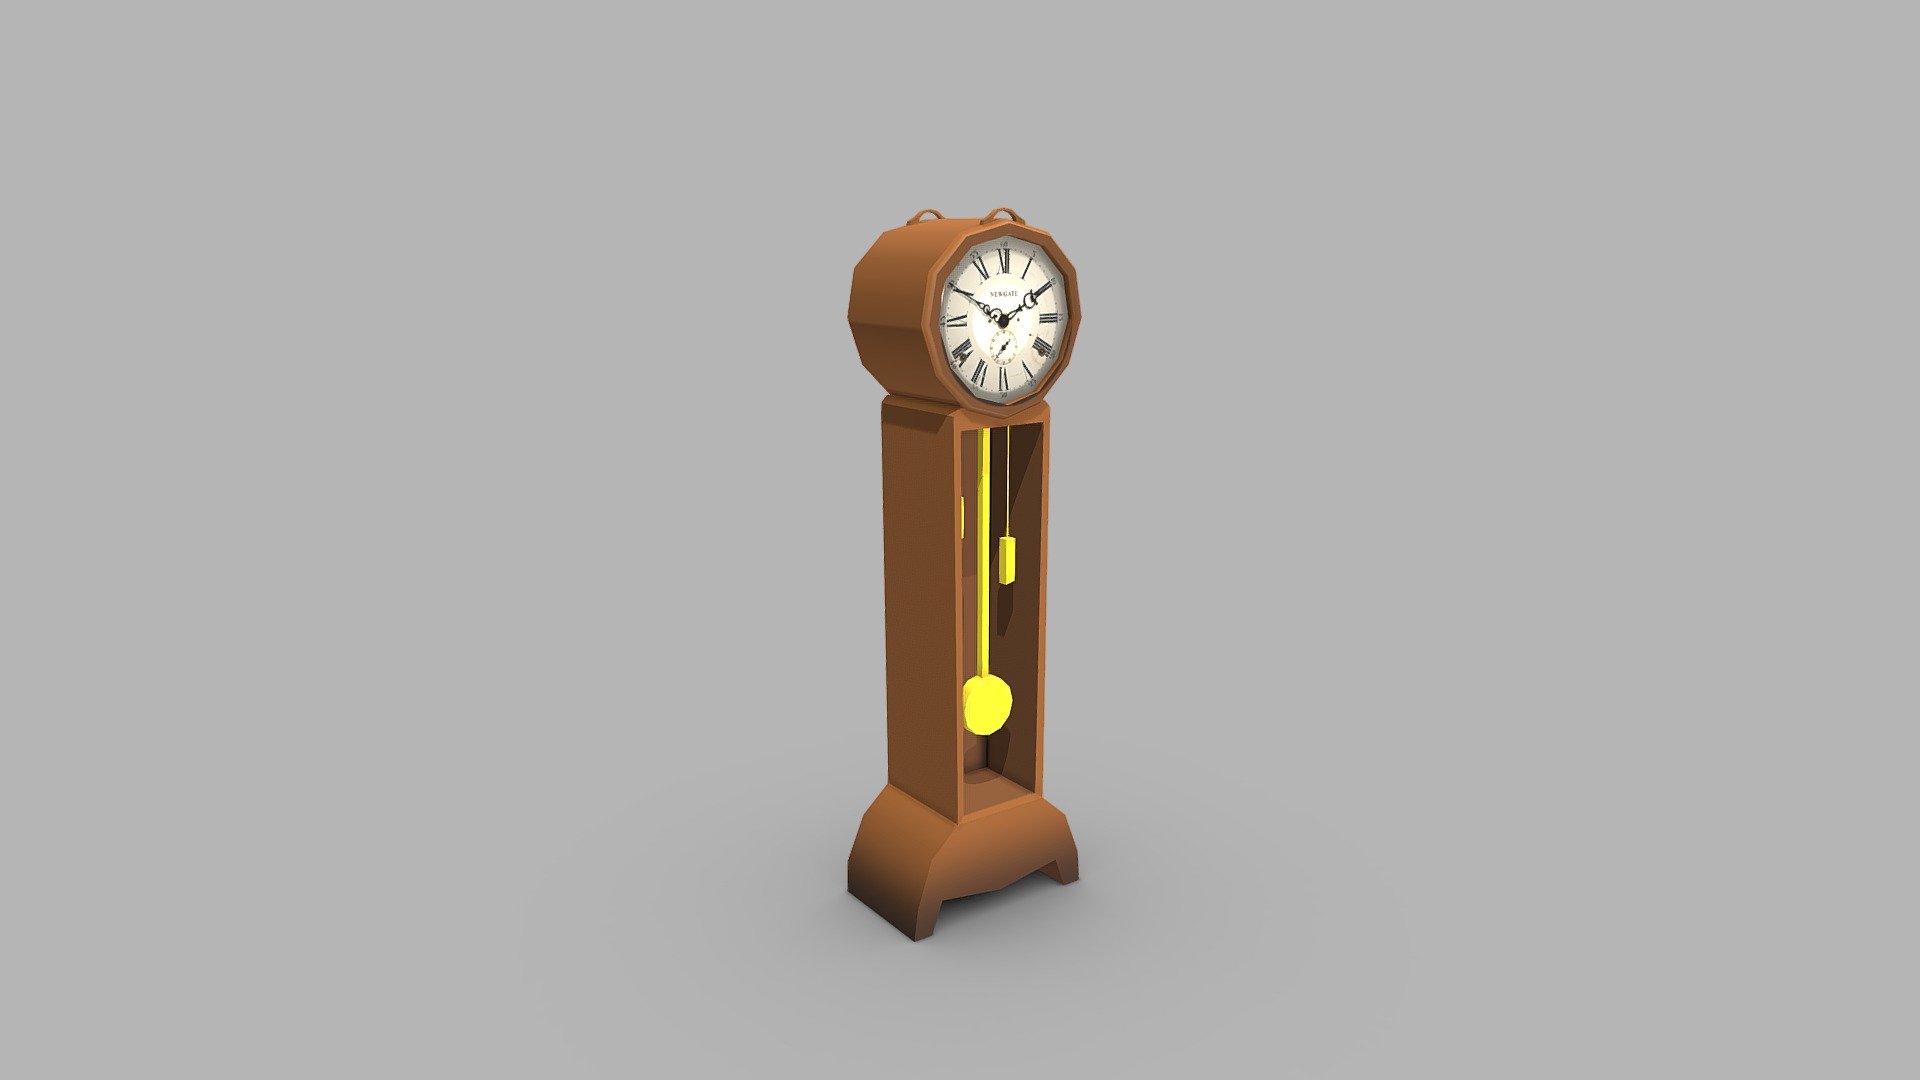 Grandfather Clock 3D model low poly. Production-ready/Game-ready 3D Model, textures and UVs provided in the package.

Package Includes:

Formats: FBX,glTF; scenes: other:

1 Object (mesh), UV-mapped Textures.

UV Layout maps and Image Textures resolutions: 2048x2048.

Real world dimensions; scene scale units: cm in 3DS Max.

Polygon Count - Triangles: 478

Grandfather Clock Created in 3D’s Max and Textures made with Substance Painter and Photoshop - Grandfather Clock Stylized [Game Ready] - Buy Royalty Free 3D model by Raphael C (@Qurka) 3d model